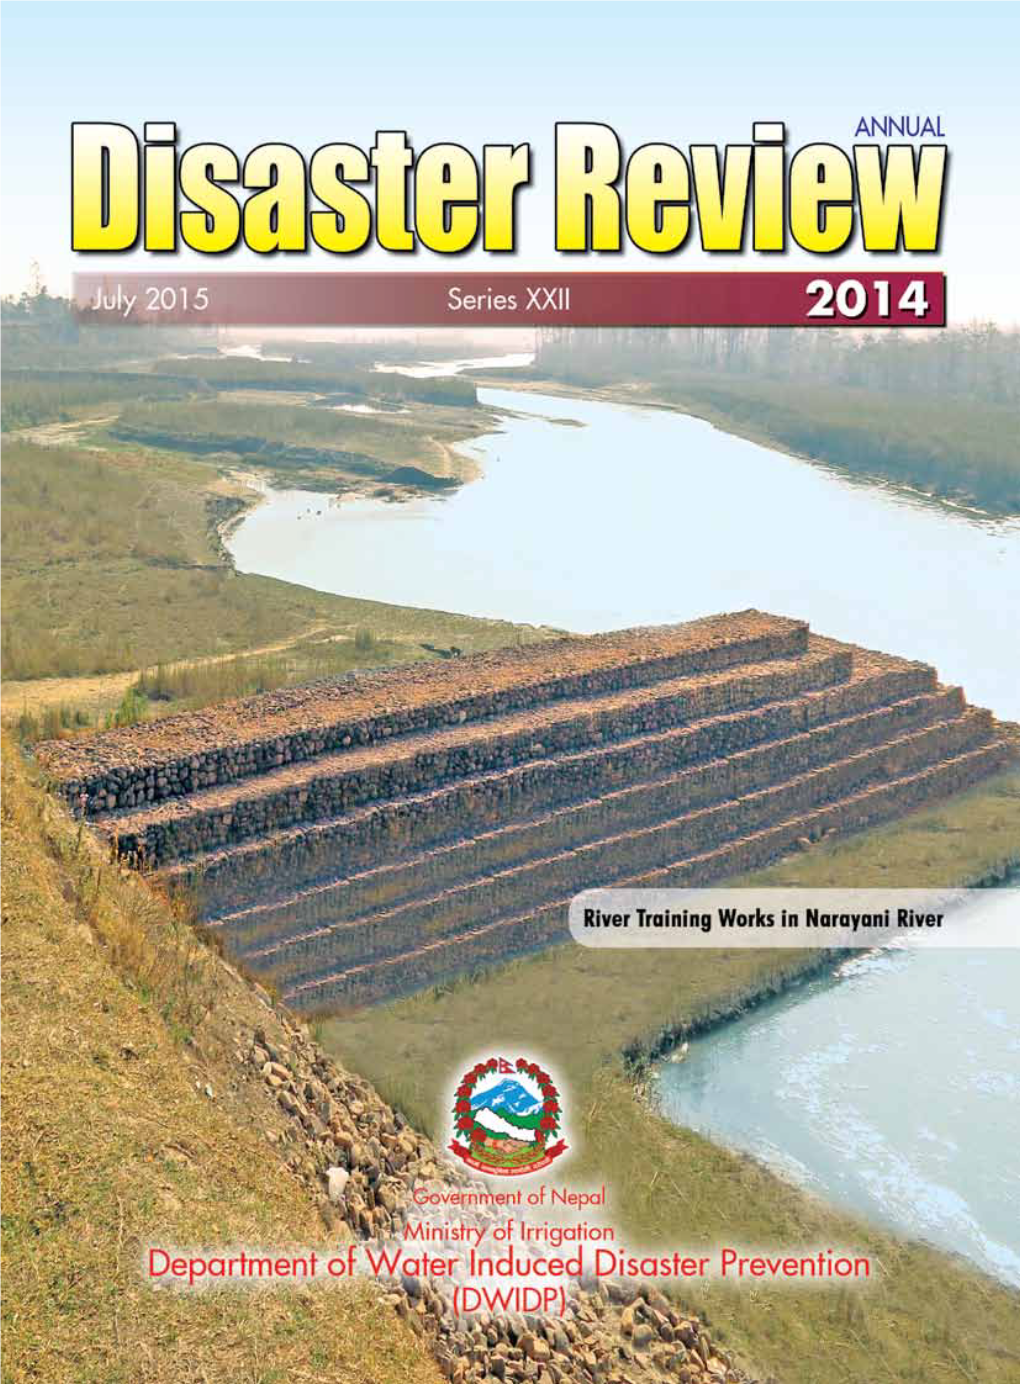 Disaster Review 2014 Dwidp